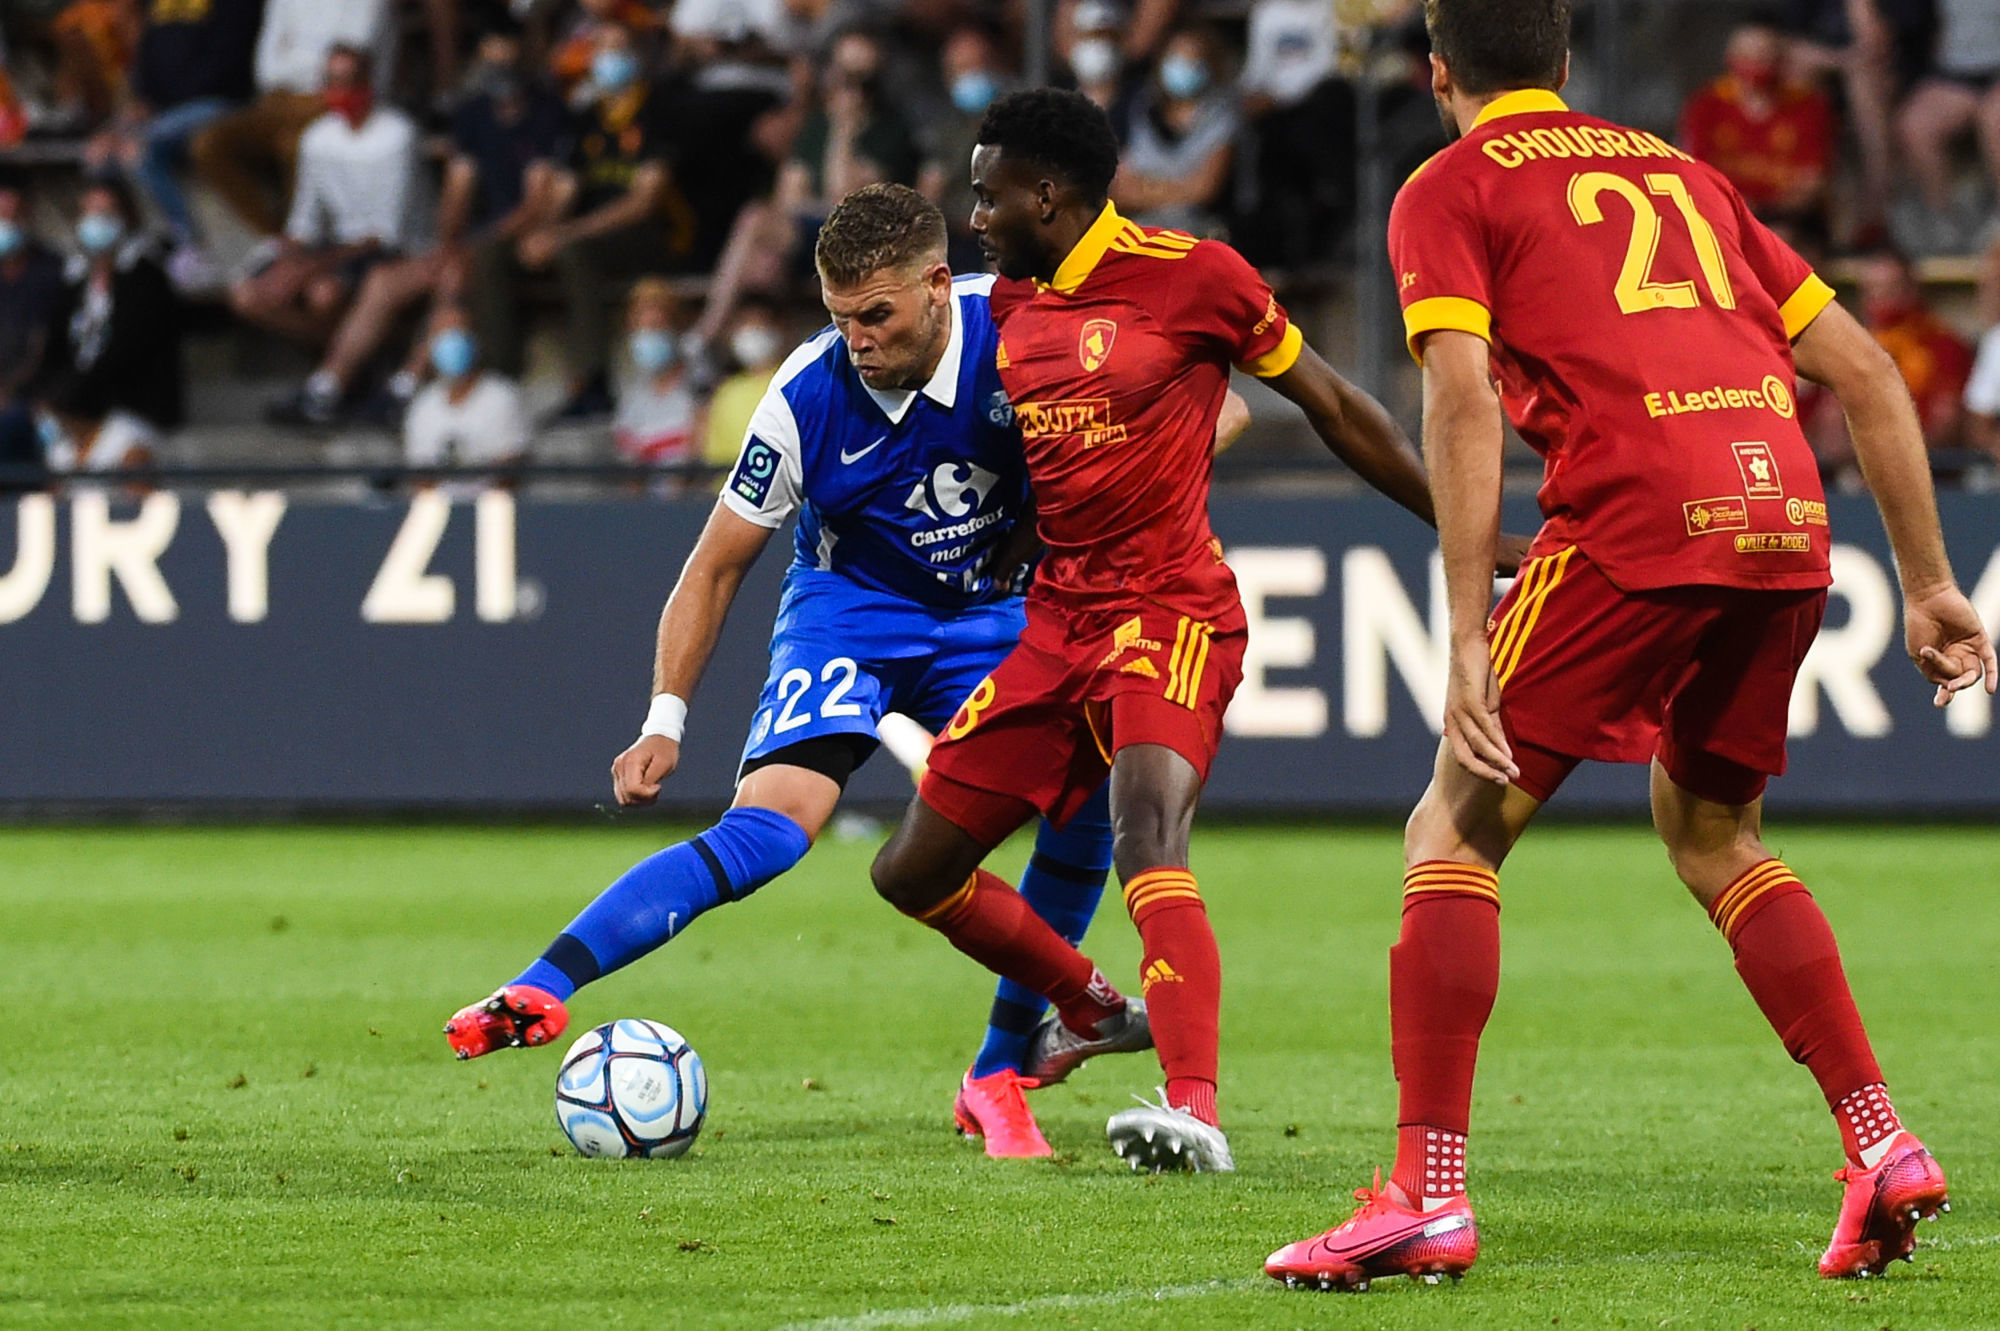 Yoric RAVET of Grenoble and Nathanael DIENG of Rodez  during the Ligue 2 match between Rodez and Grenoble on August 22, 2020 in Rodez, France. (Photo by Alexandre Dimou/Icon Sport) - Stade Paul Lignon - Rodez (France)